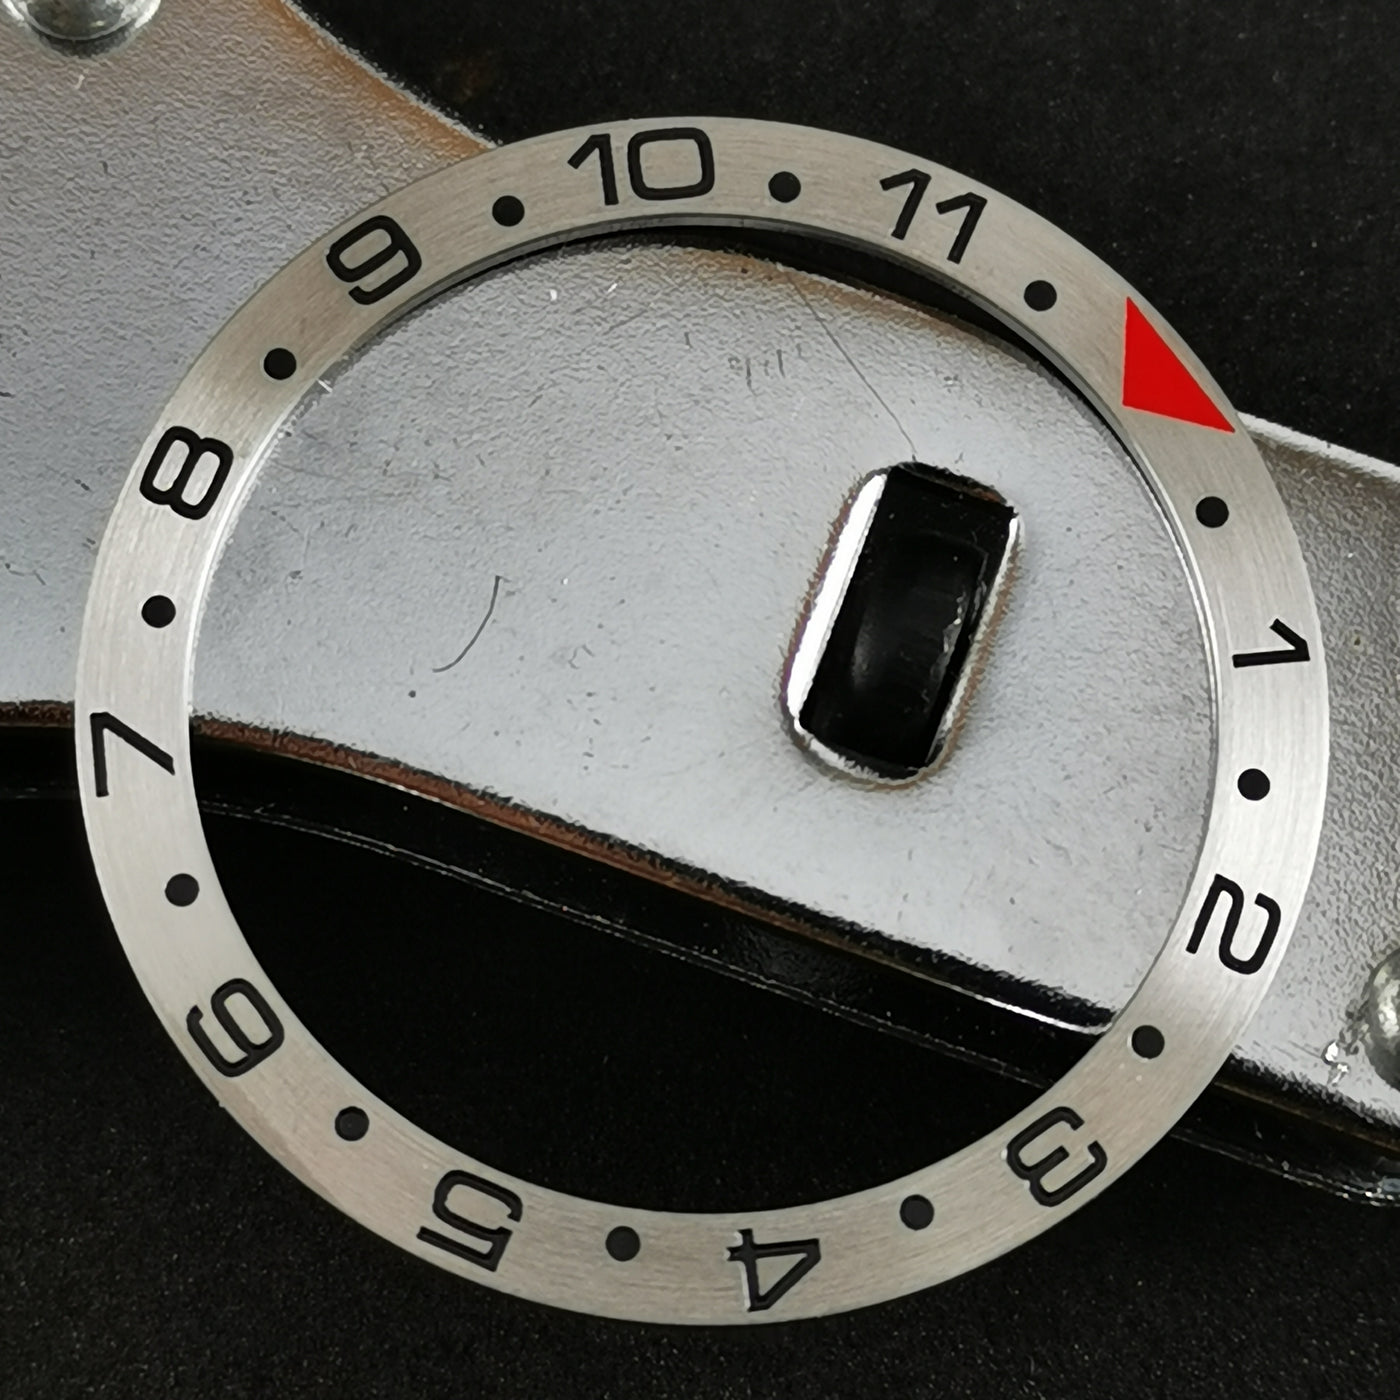 SI0111 SRP Turtle Re-issue Stainless Bezel Insert - DT Red